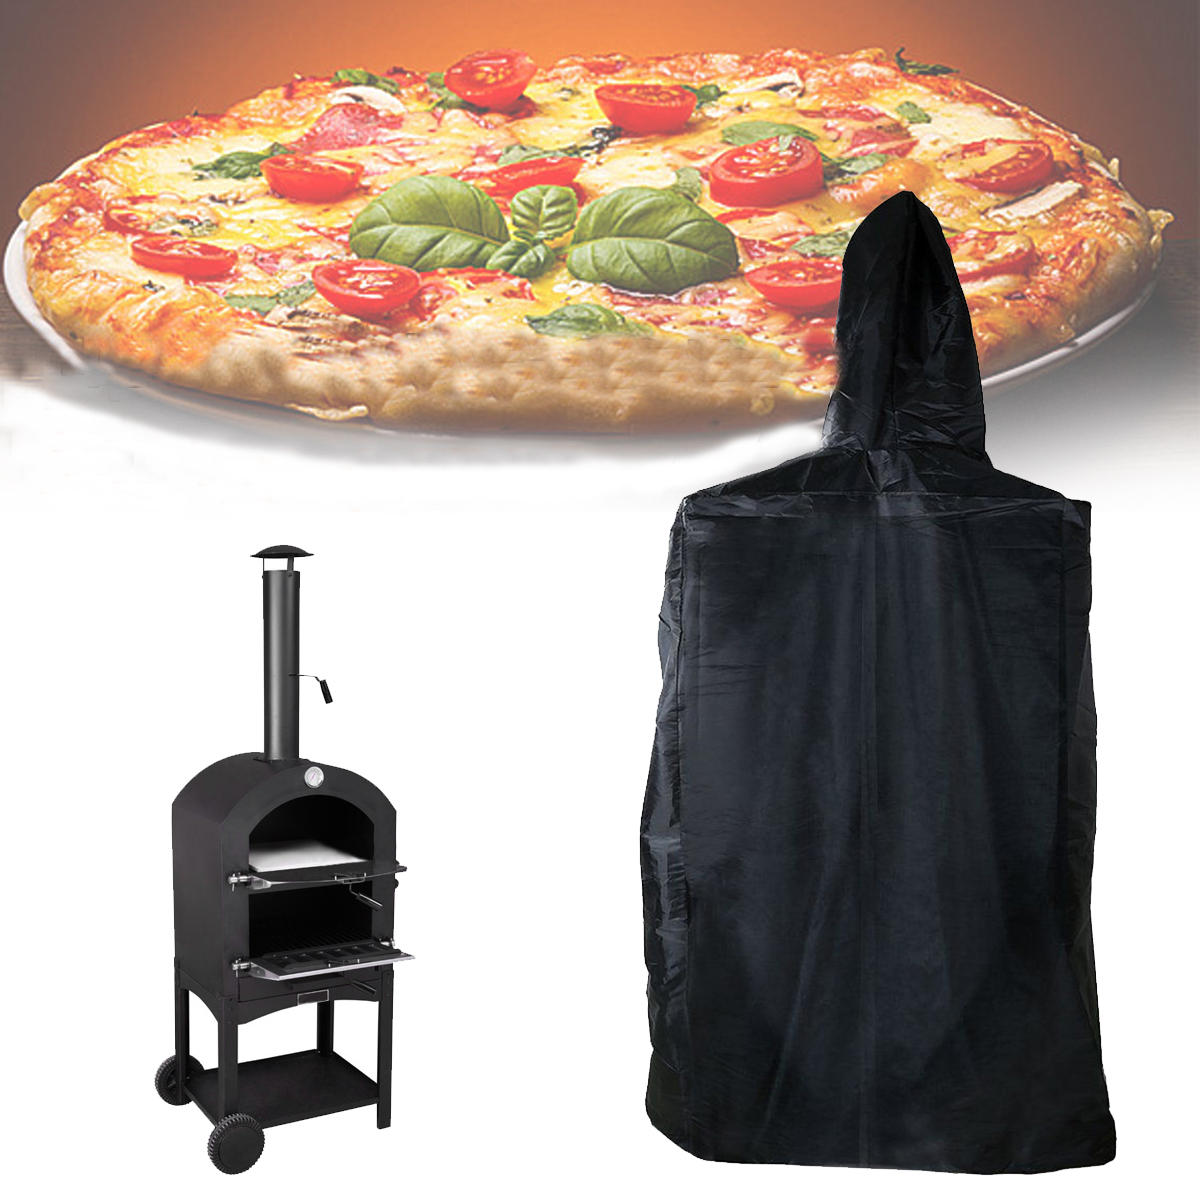 160x37x50cm Outdoor Pizza Oven Cover Cooking Stove Waterproof Dust Rain UV Proof Protector  